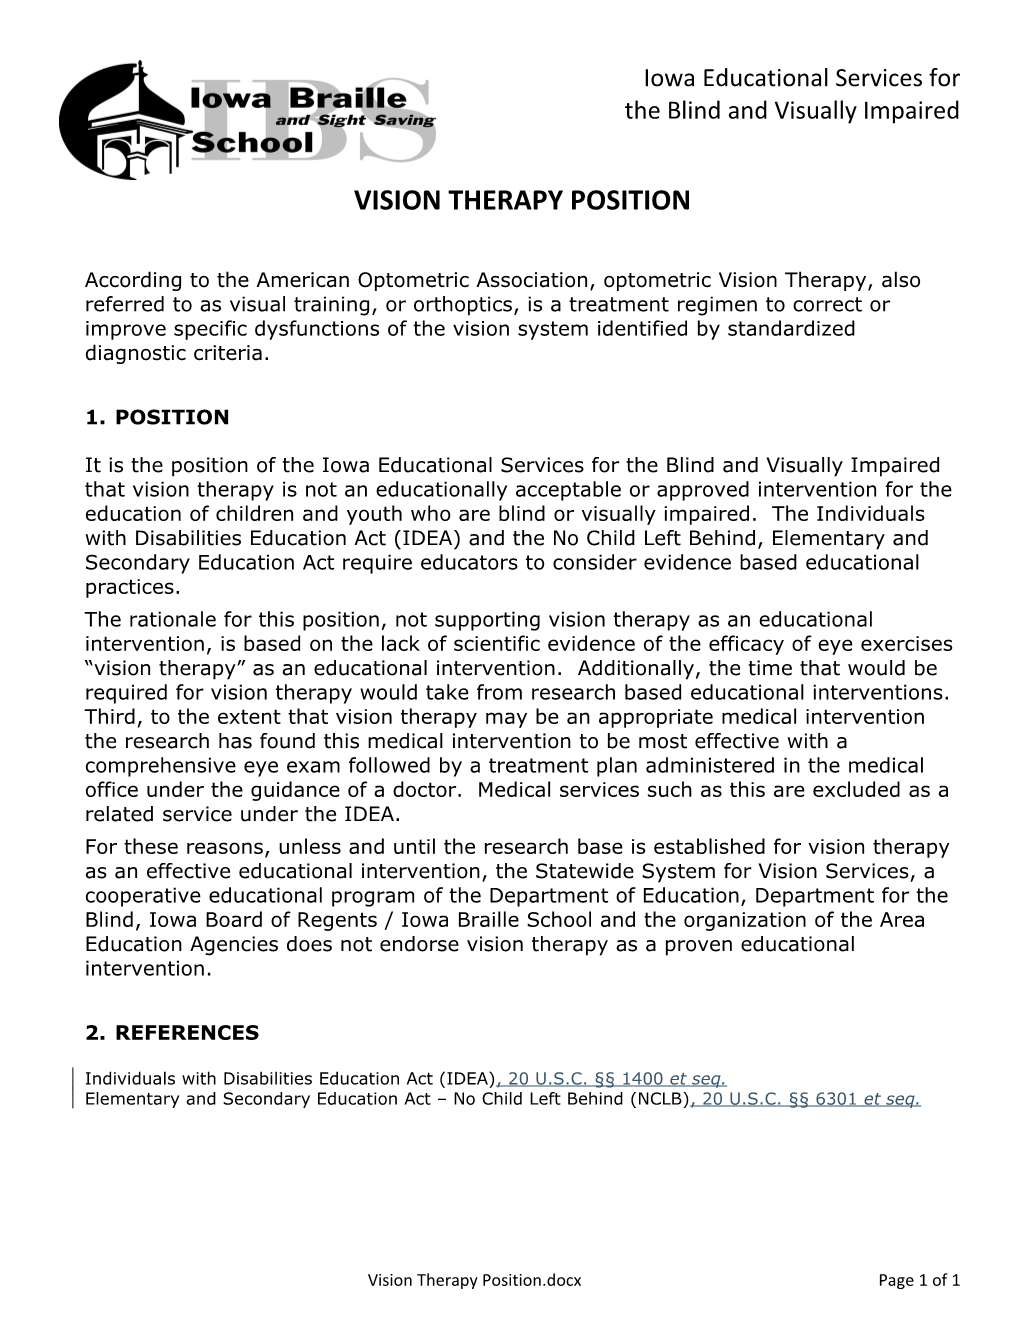 Vision Therapy Position